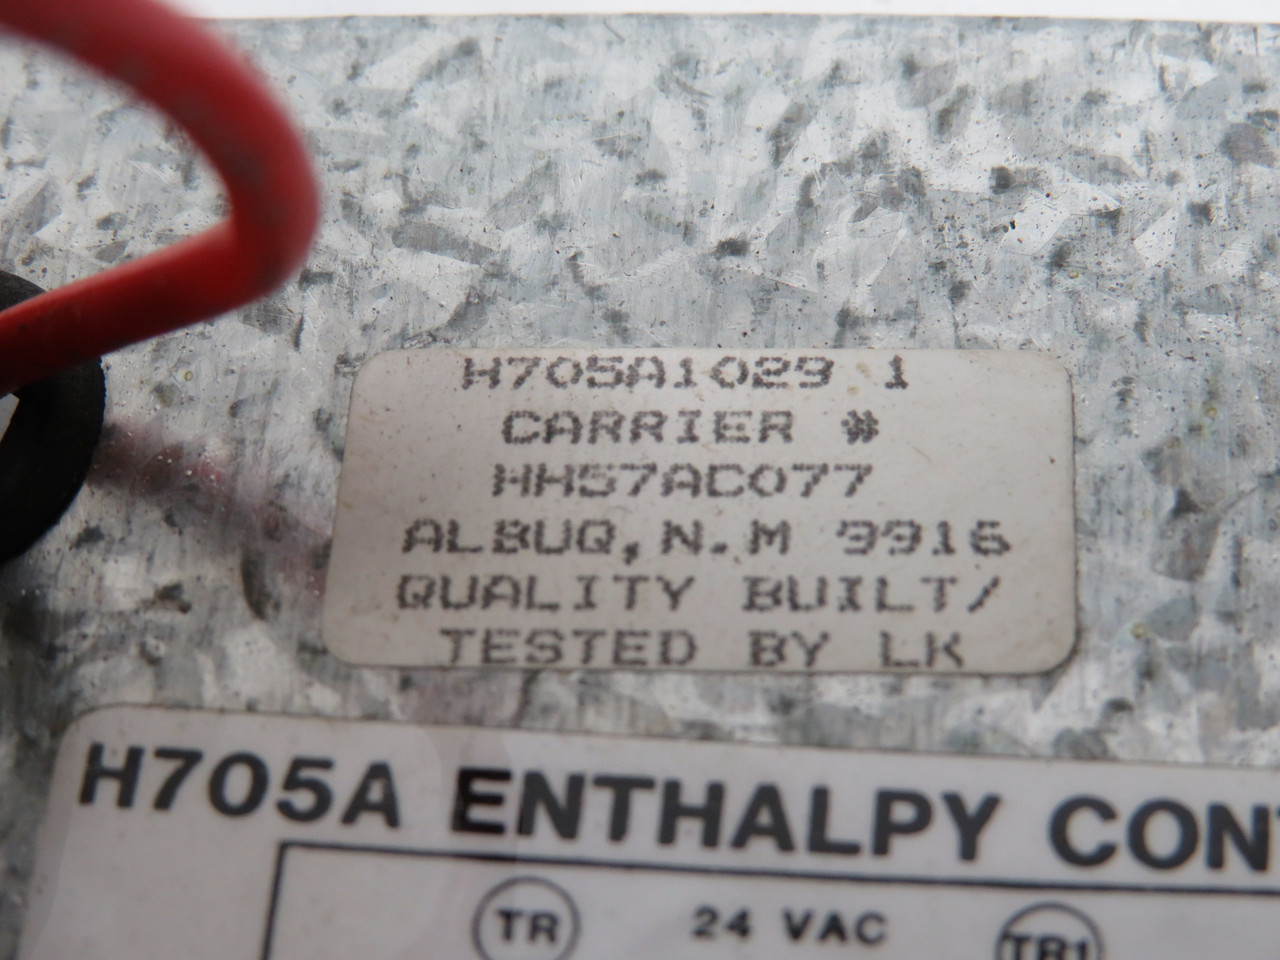 Honeywell H705A1029 Enthalpy Control Module Carrier HH57AC077 USED